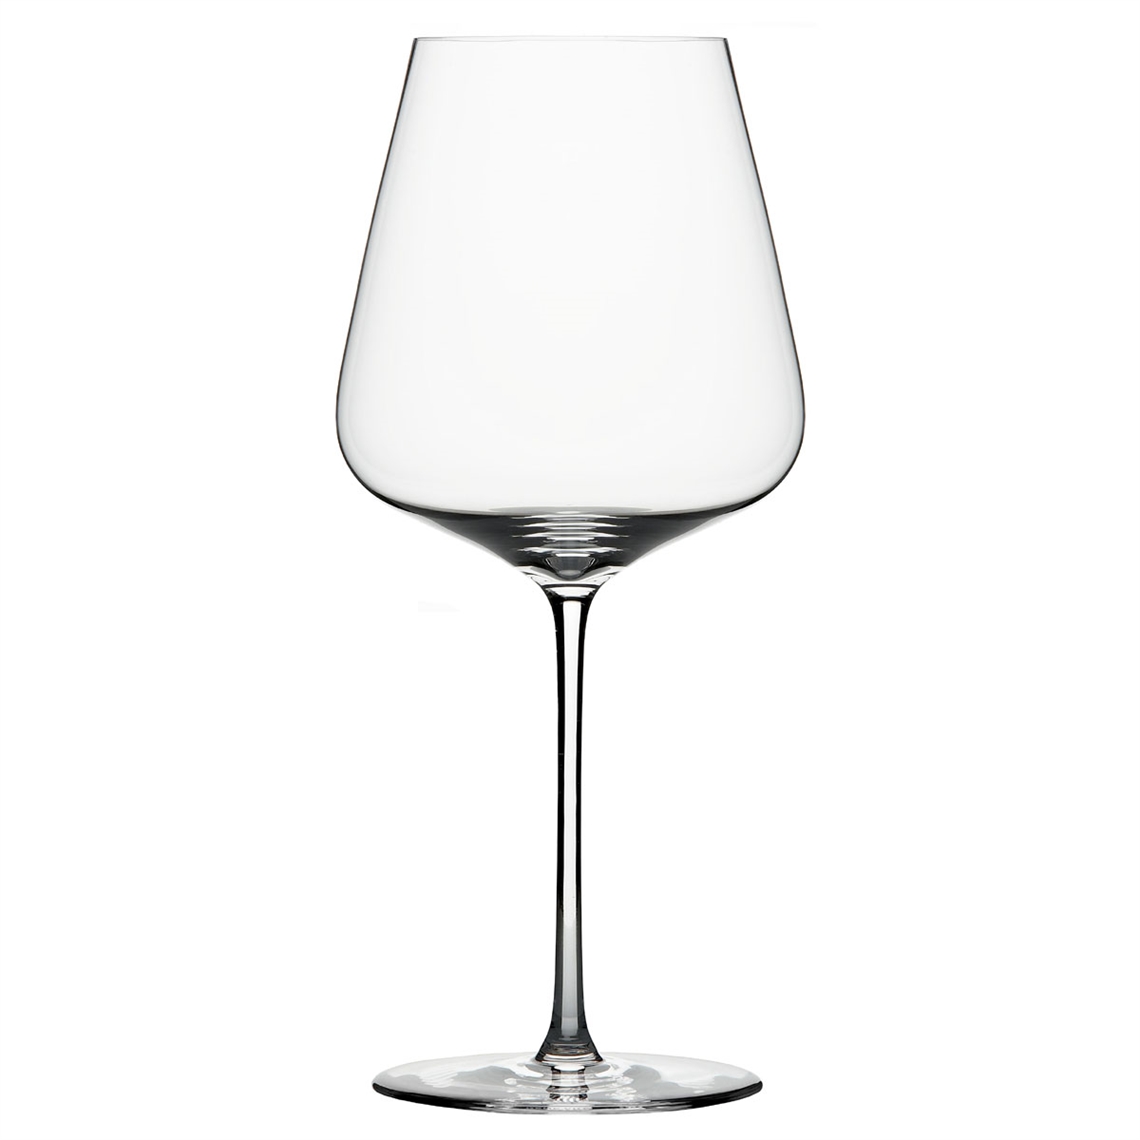 View more wine glasses from our Premium Mouth Blown Glassware range